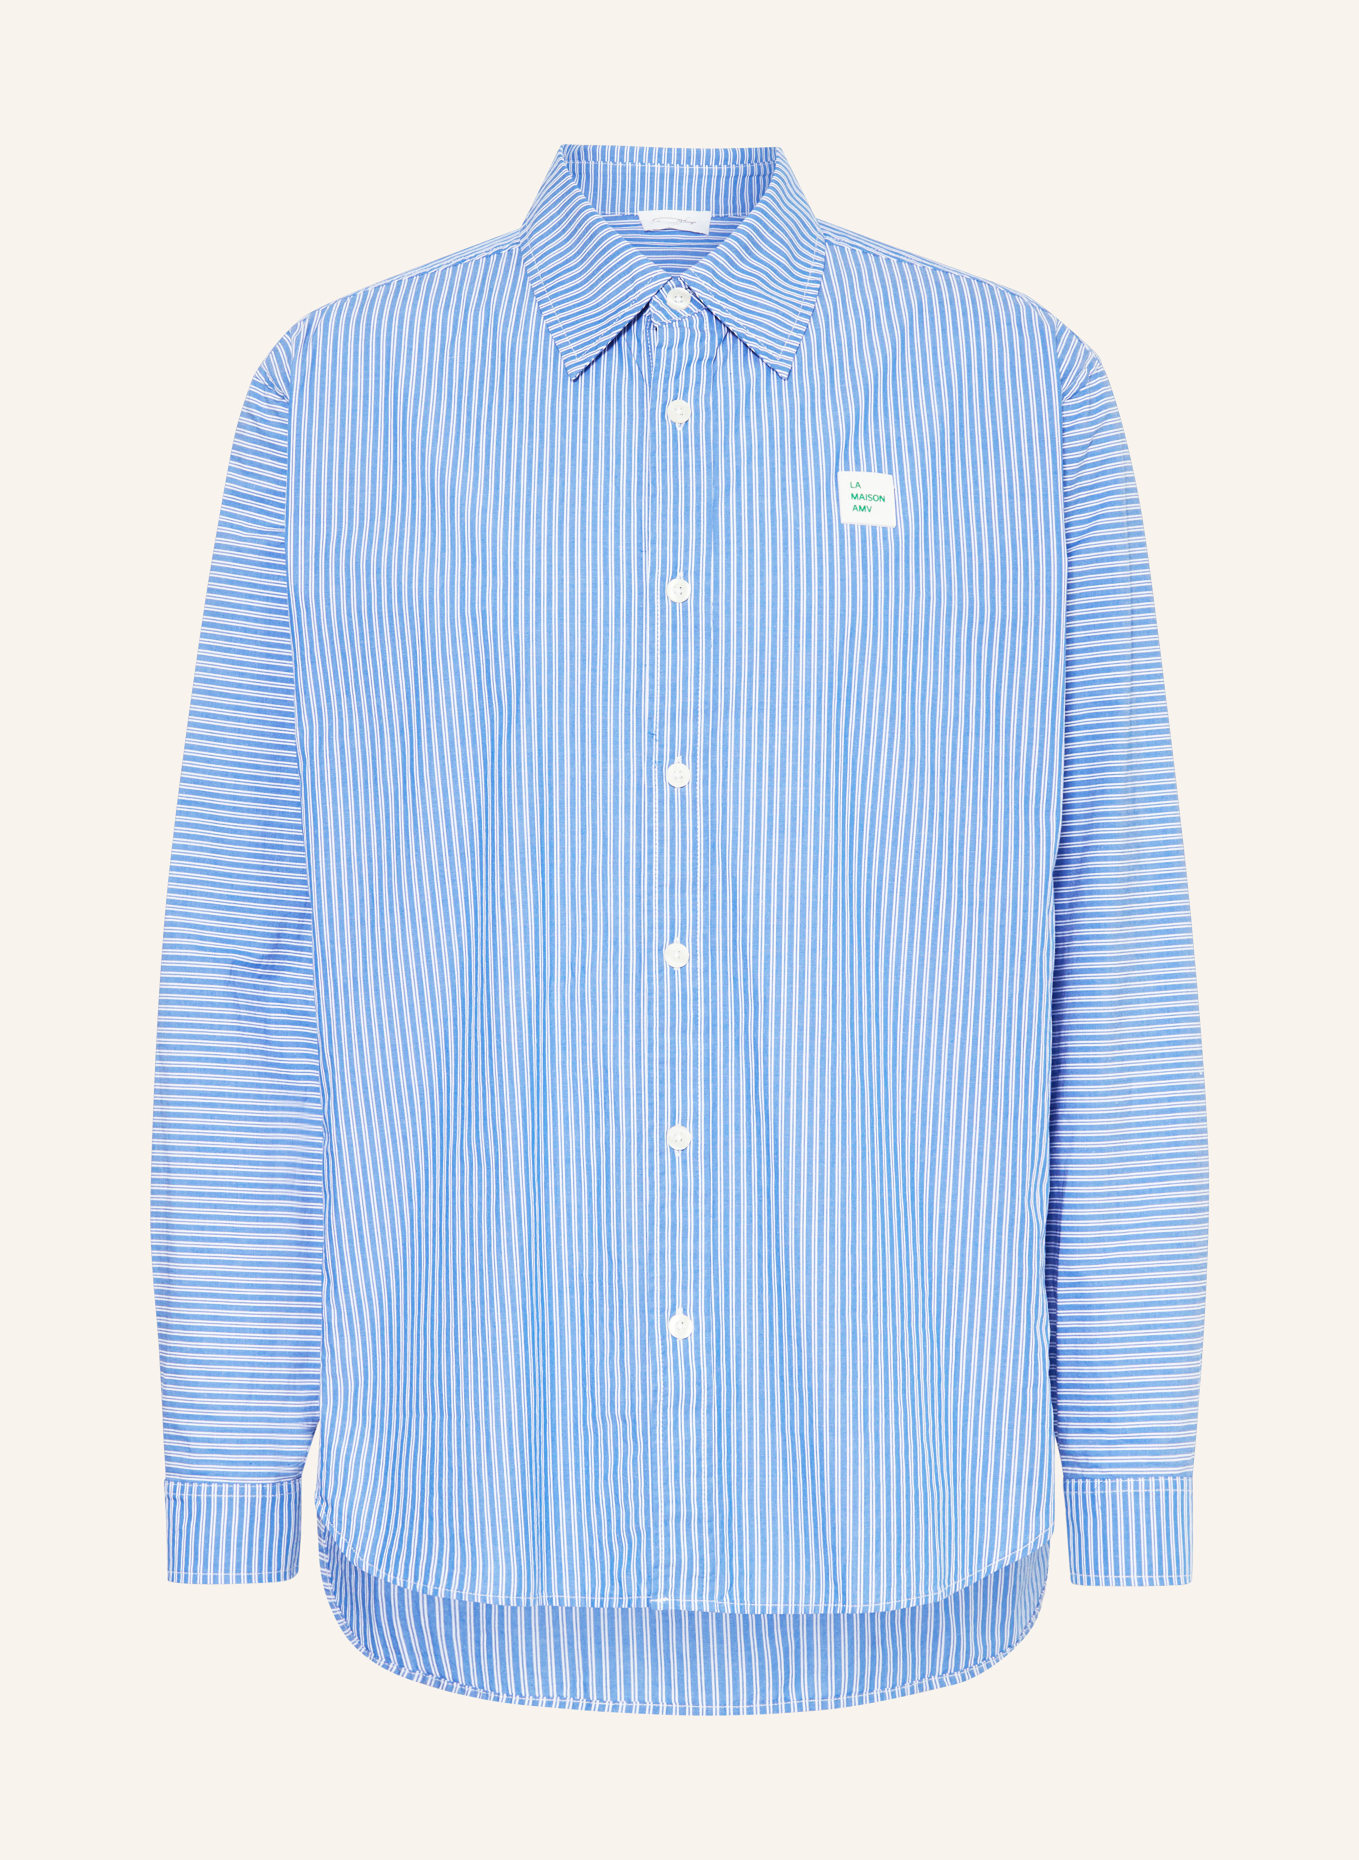 American Vintage Shirt ZATYBAY comfort fit, Color: BLUE/ WHITE (Image 1)